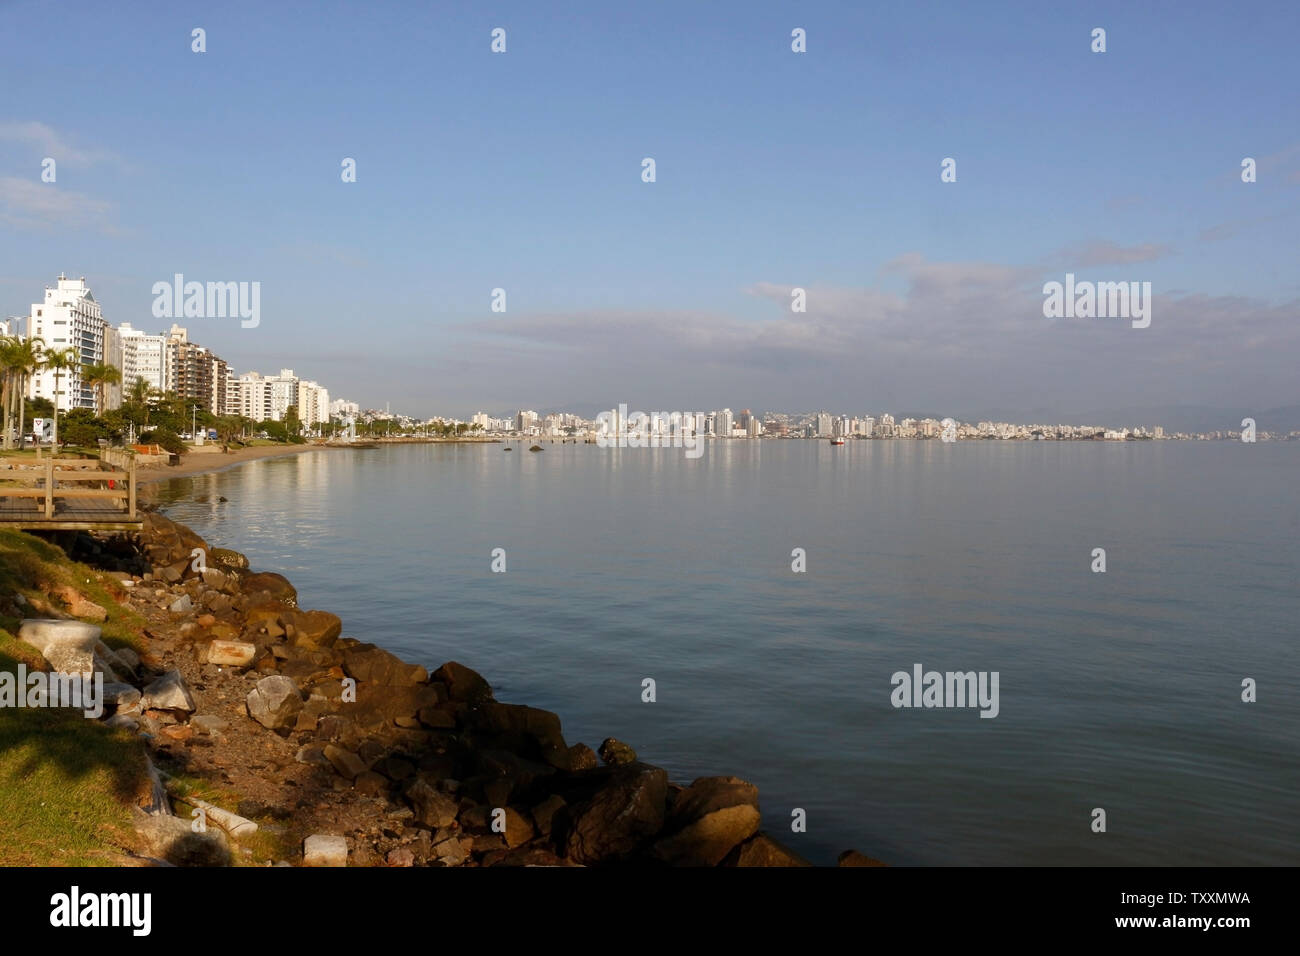 Skyline of the city of Florianópolis. North sea border, hiking, pedaling, and water sports, in the state of Santa Catarina, Brazil. Stock Photo